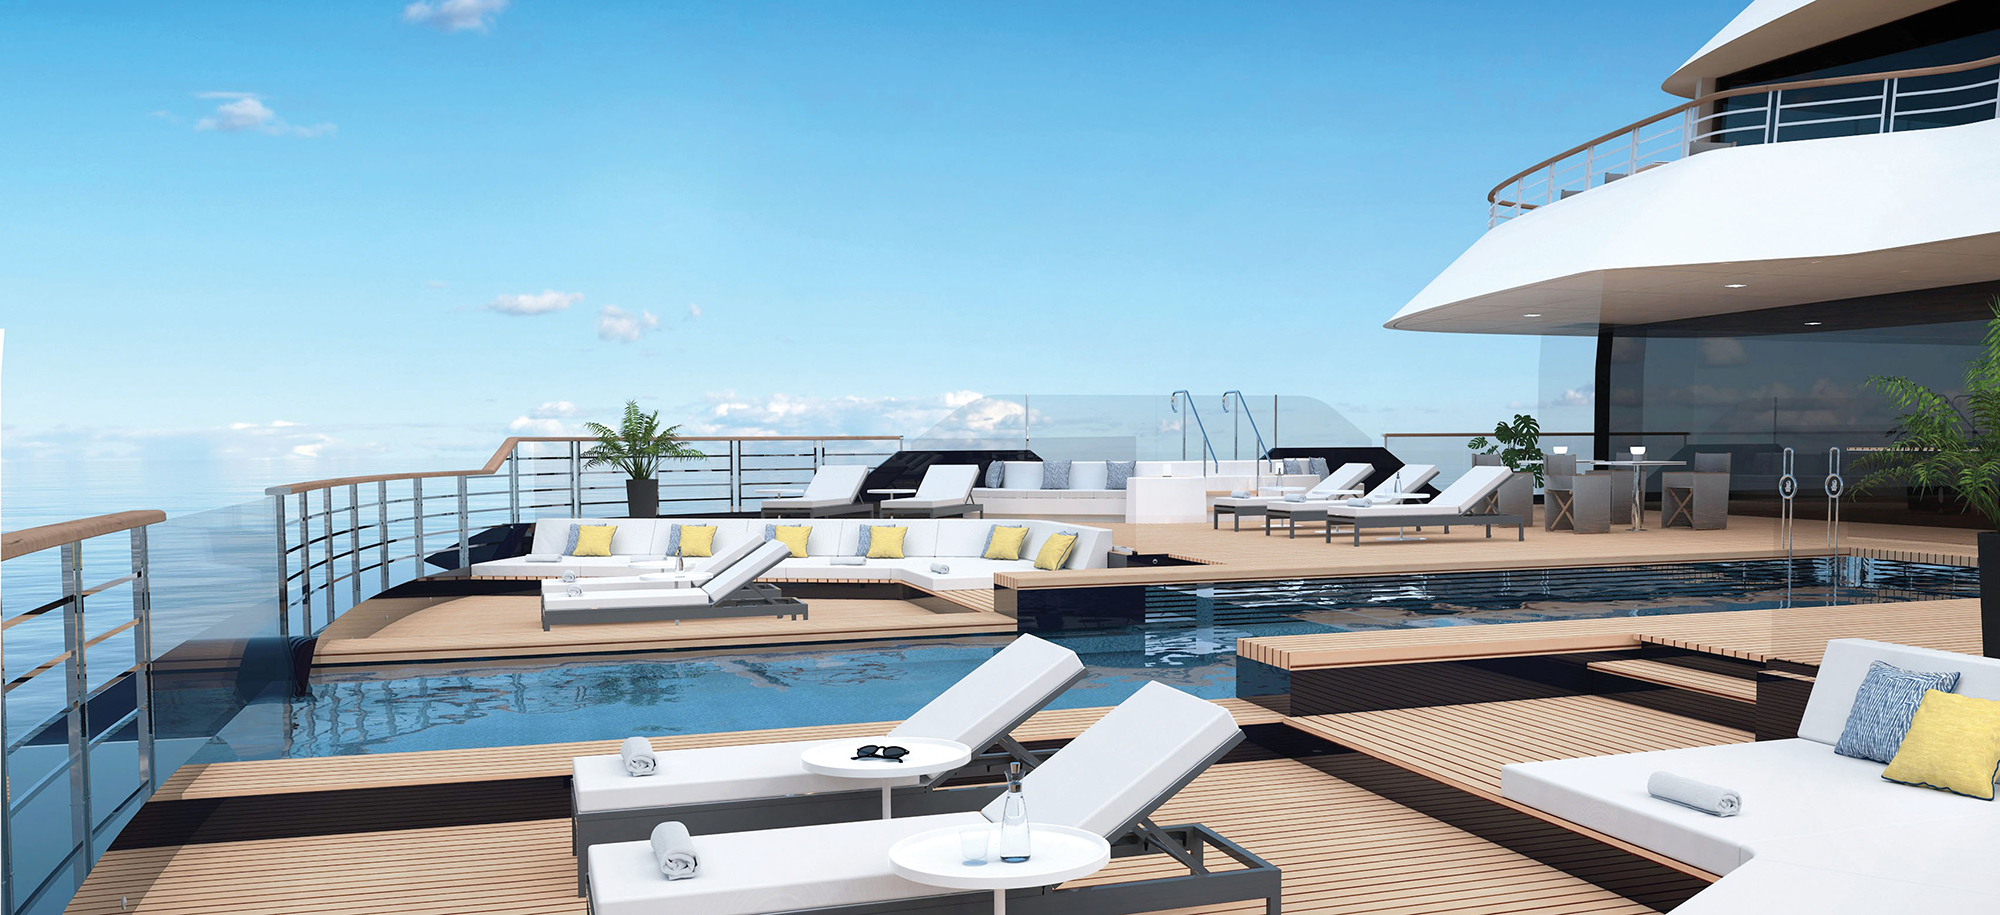 Aft Main Pool Deck (The Ritz-Carlton Yacht Collection)